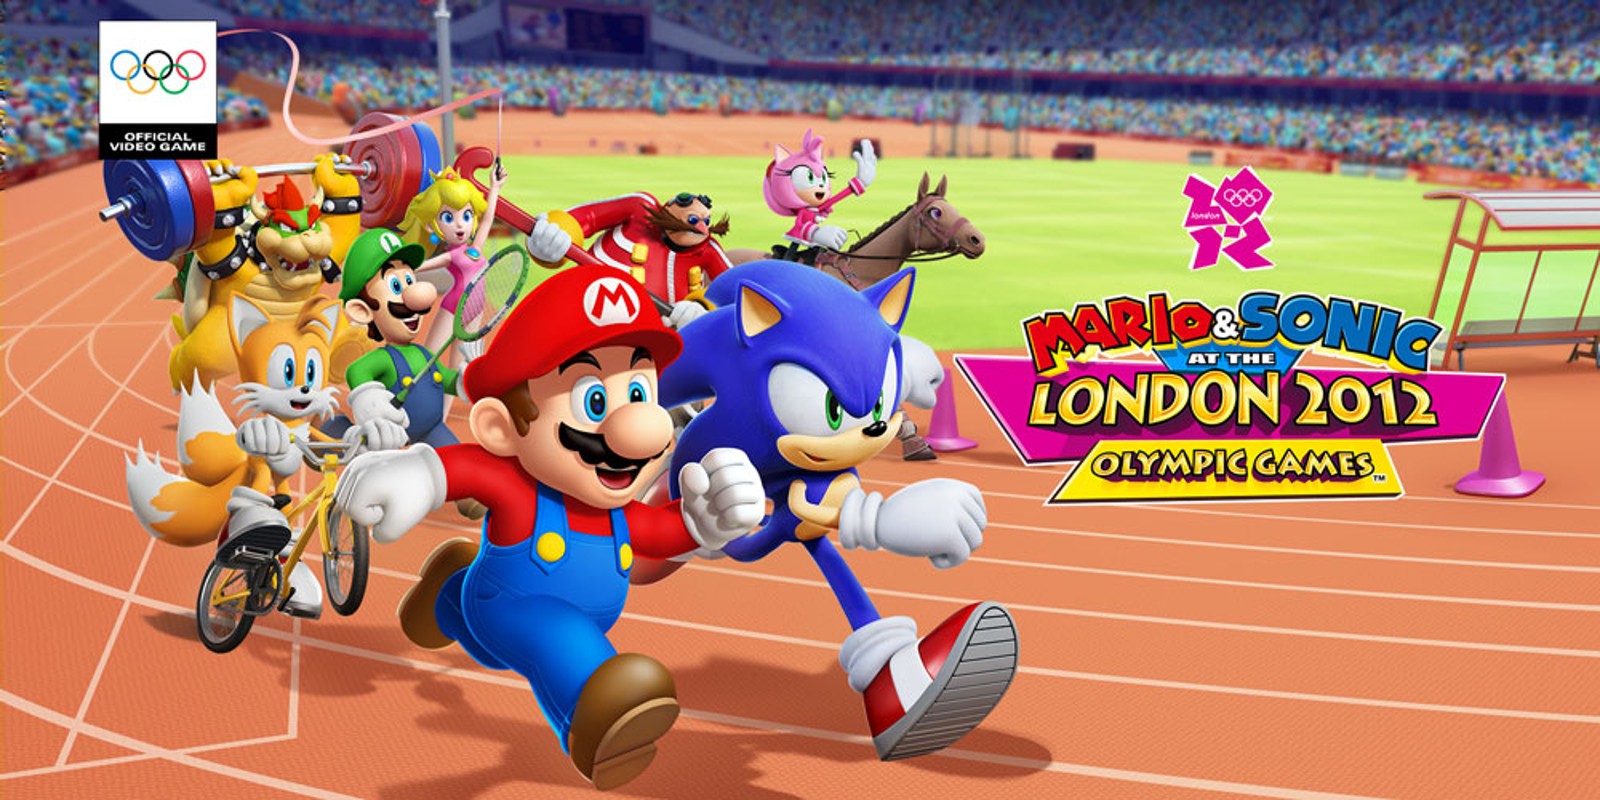 Mario & Sonic at the London 2012 Olympic Games™